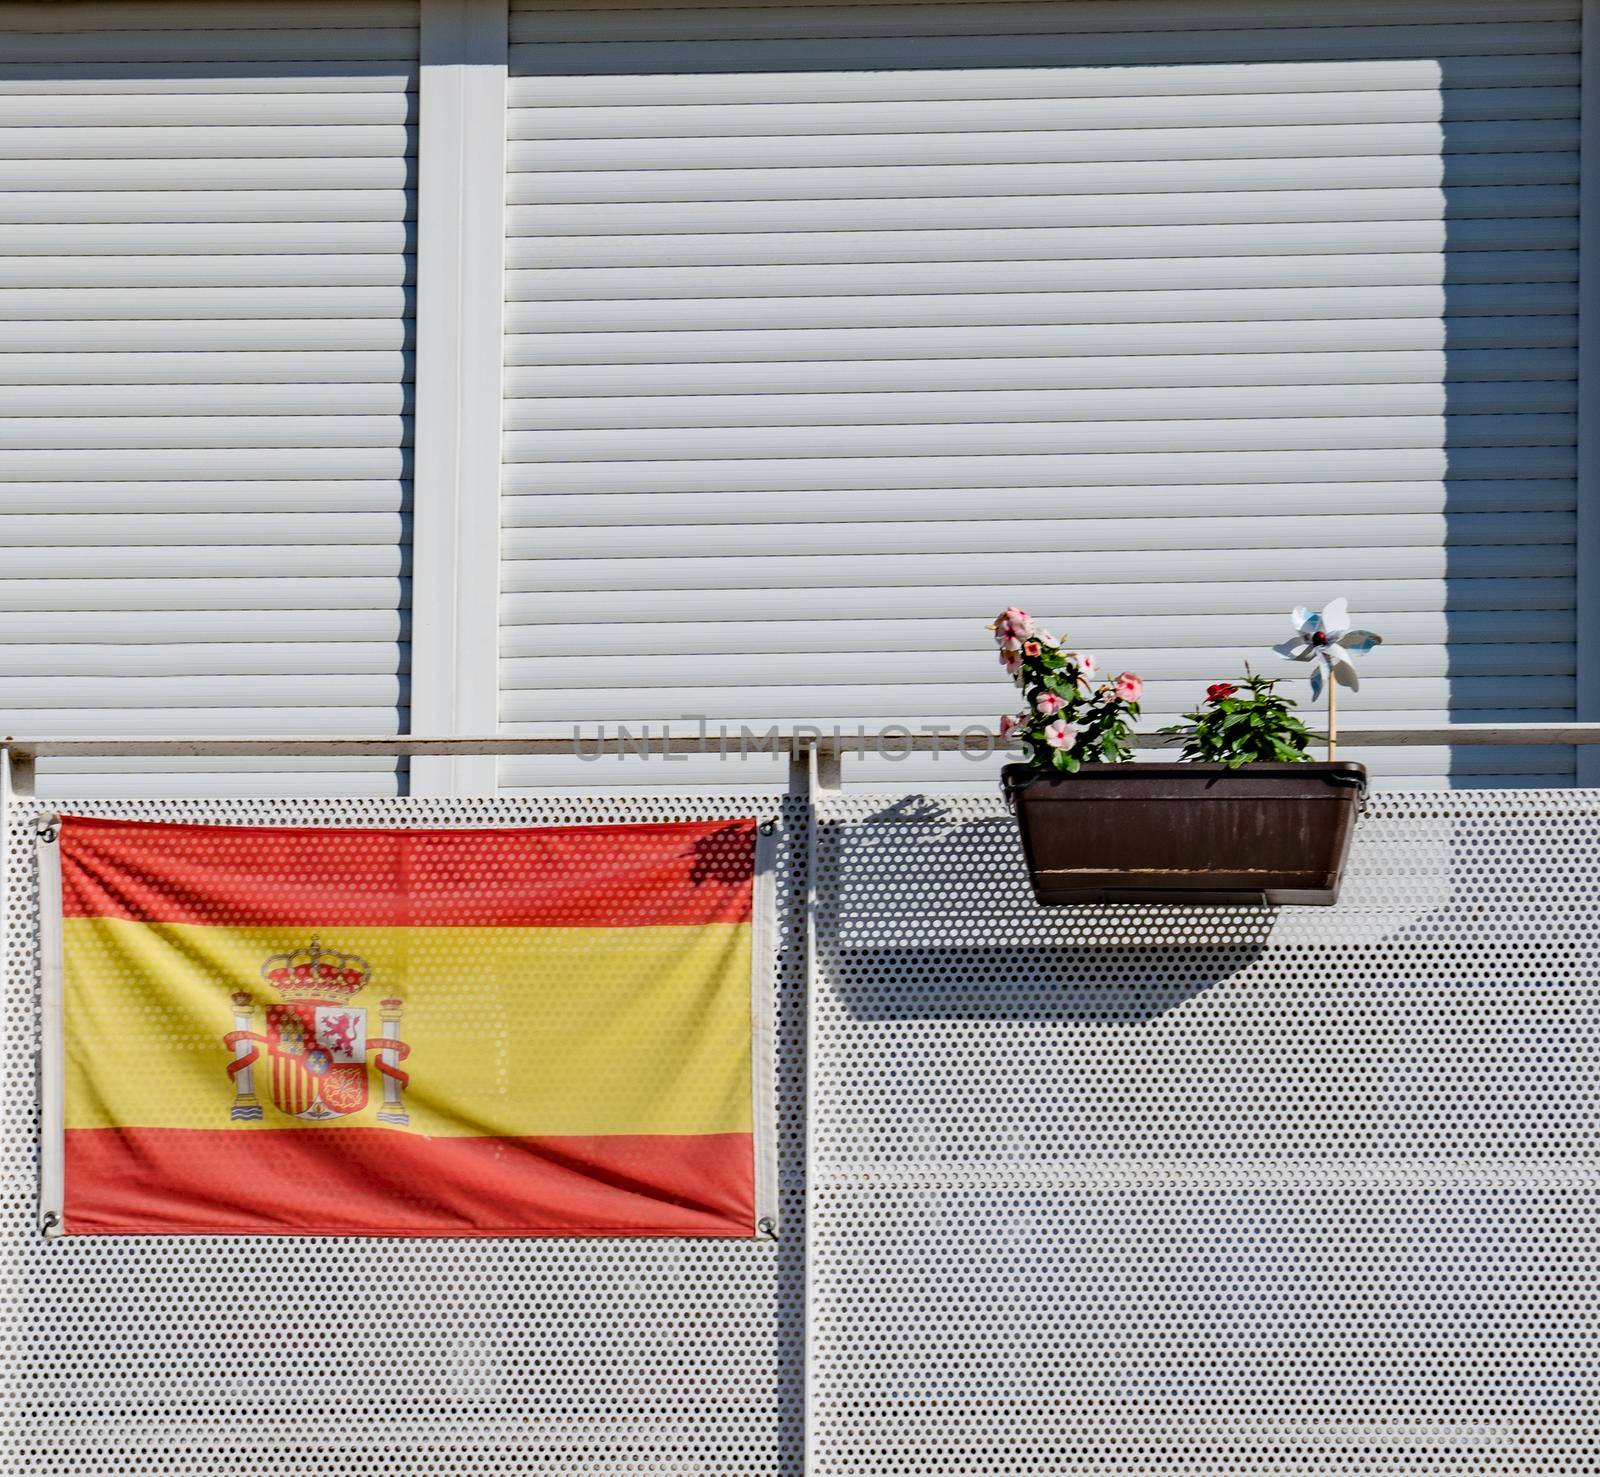 Spanish flag on a white color balcony and a plot with flowers.